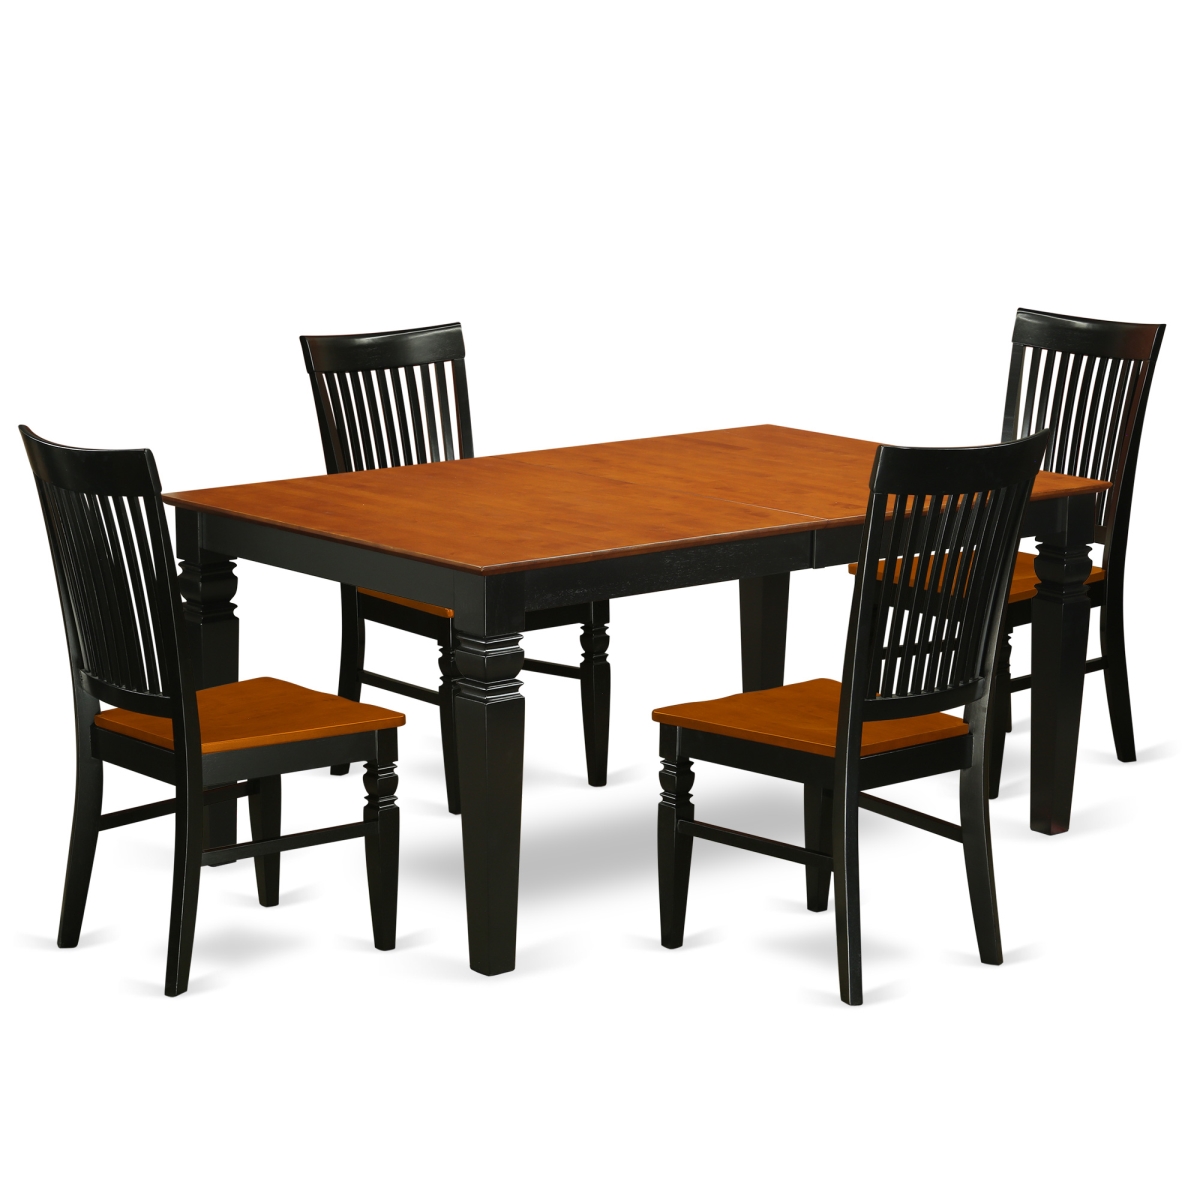 LGWE5-BCH-W Kitchen Table Set with a Dining Table & 4 Wood Seat Dining Chairs, 5 piece - Black & Cherry -  East West Furniture